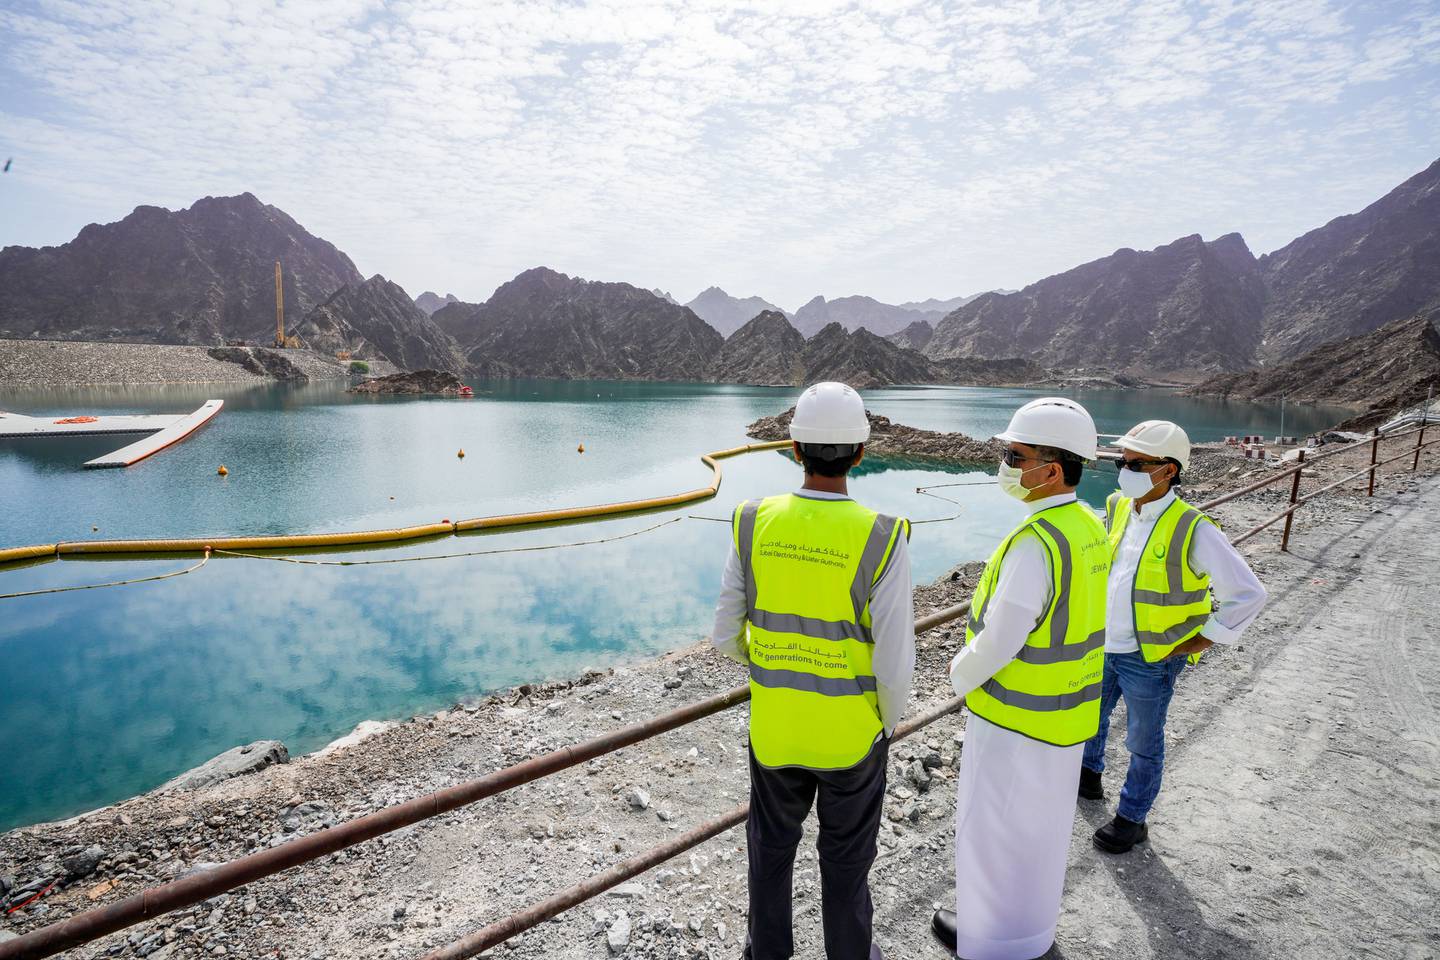 Saeed Al Tayer, centre, managing director of Dewa, recently reviewed the work taking place on the Dubai Mountain Peak and Hatta Sustainable Waterfalls projects. Photo: Dubai Media Office